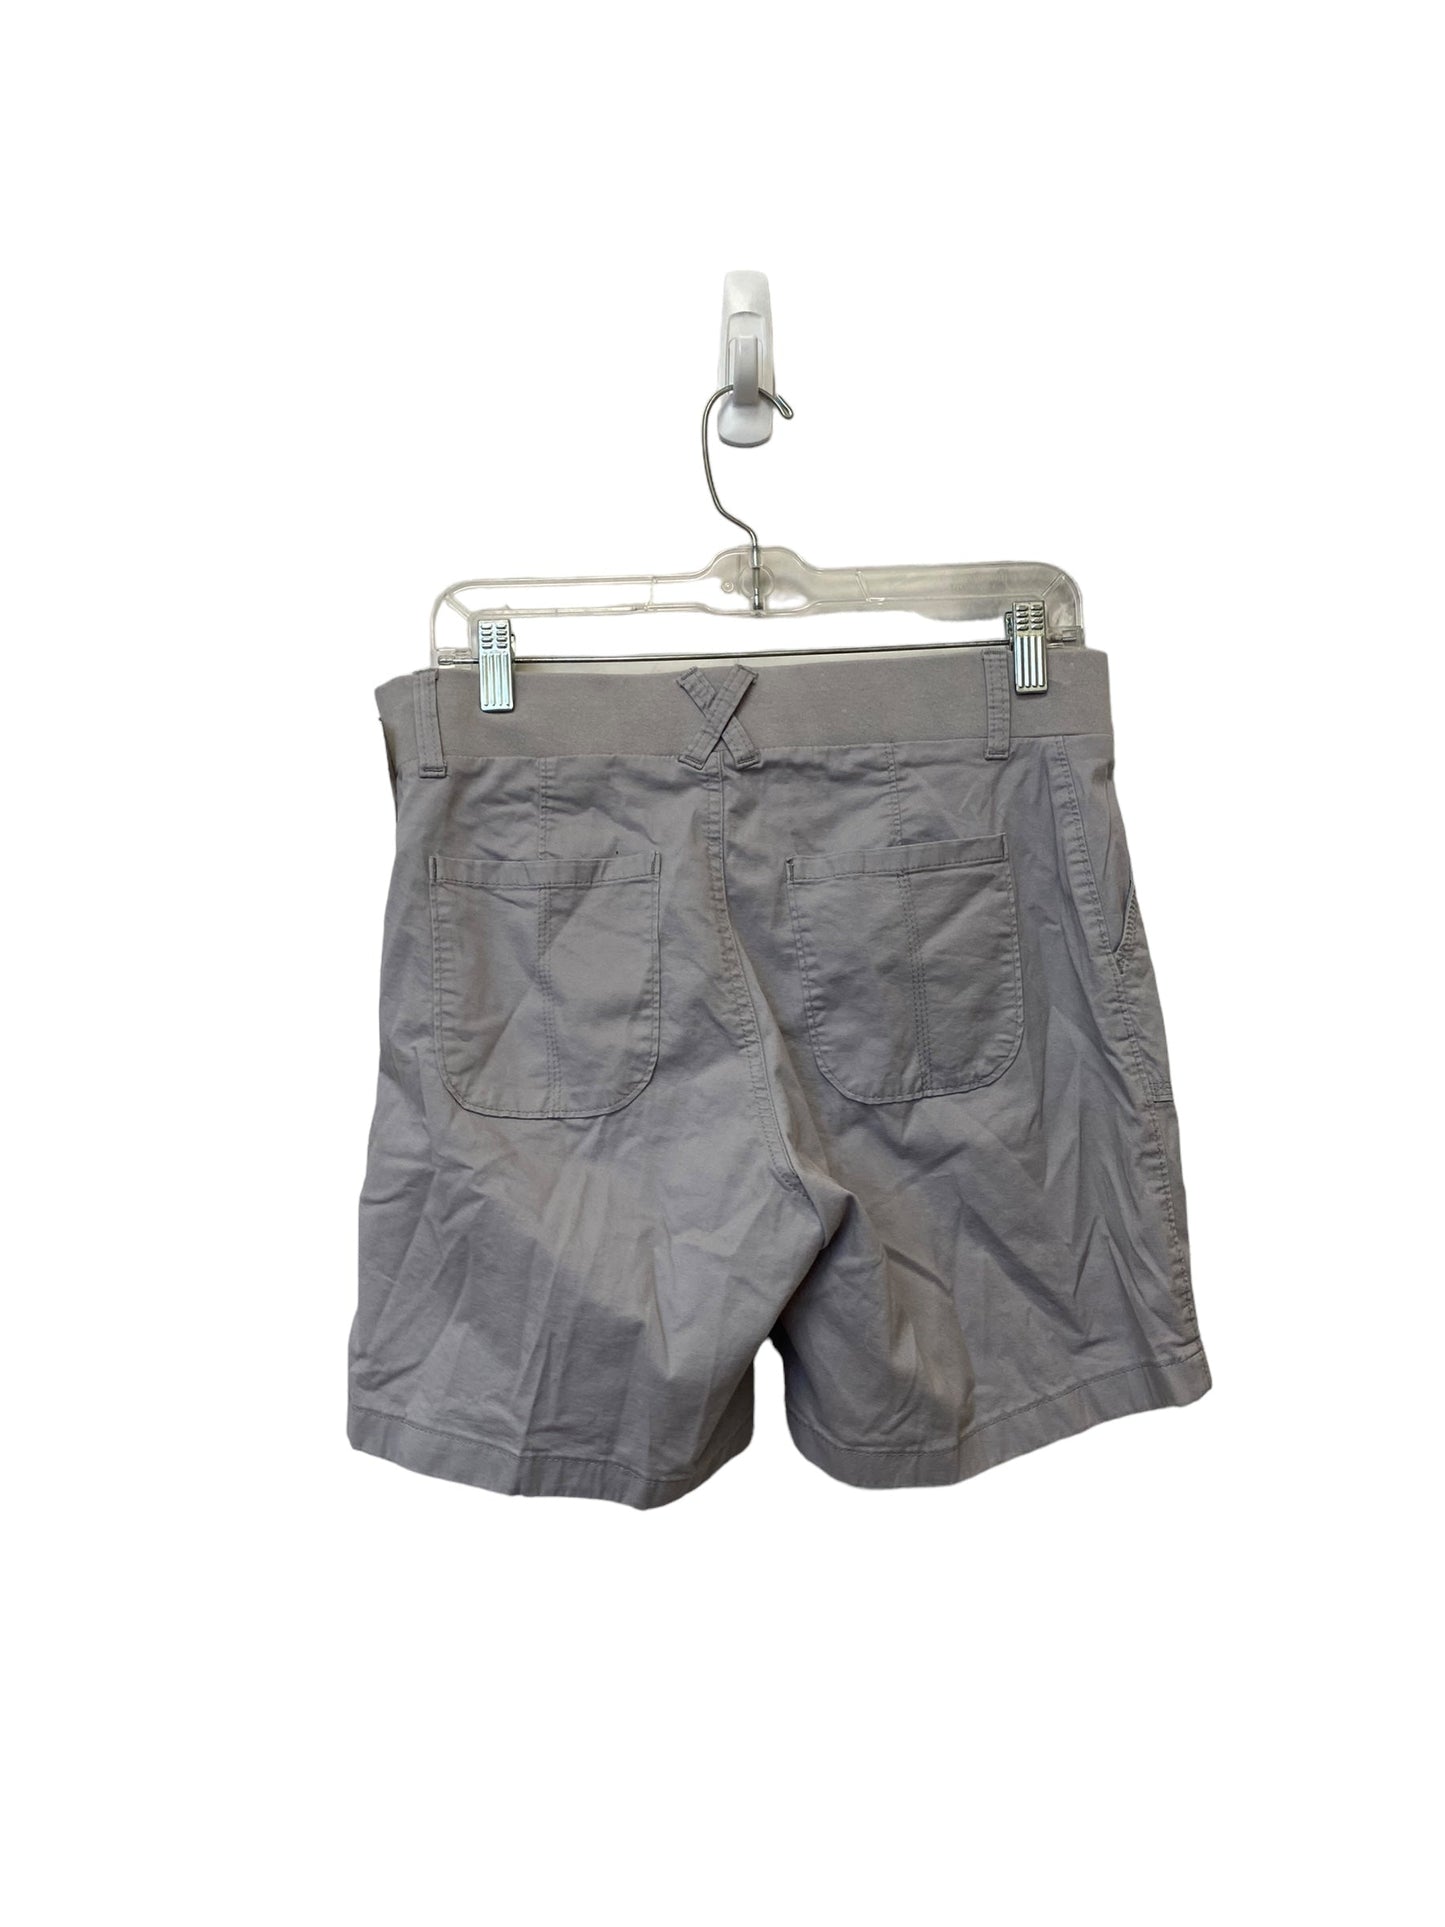 Green Shorts Lee, Size 8